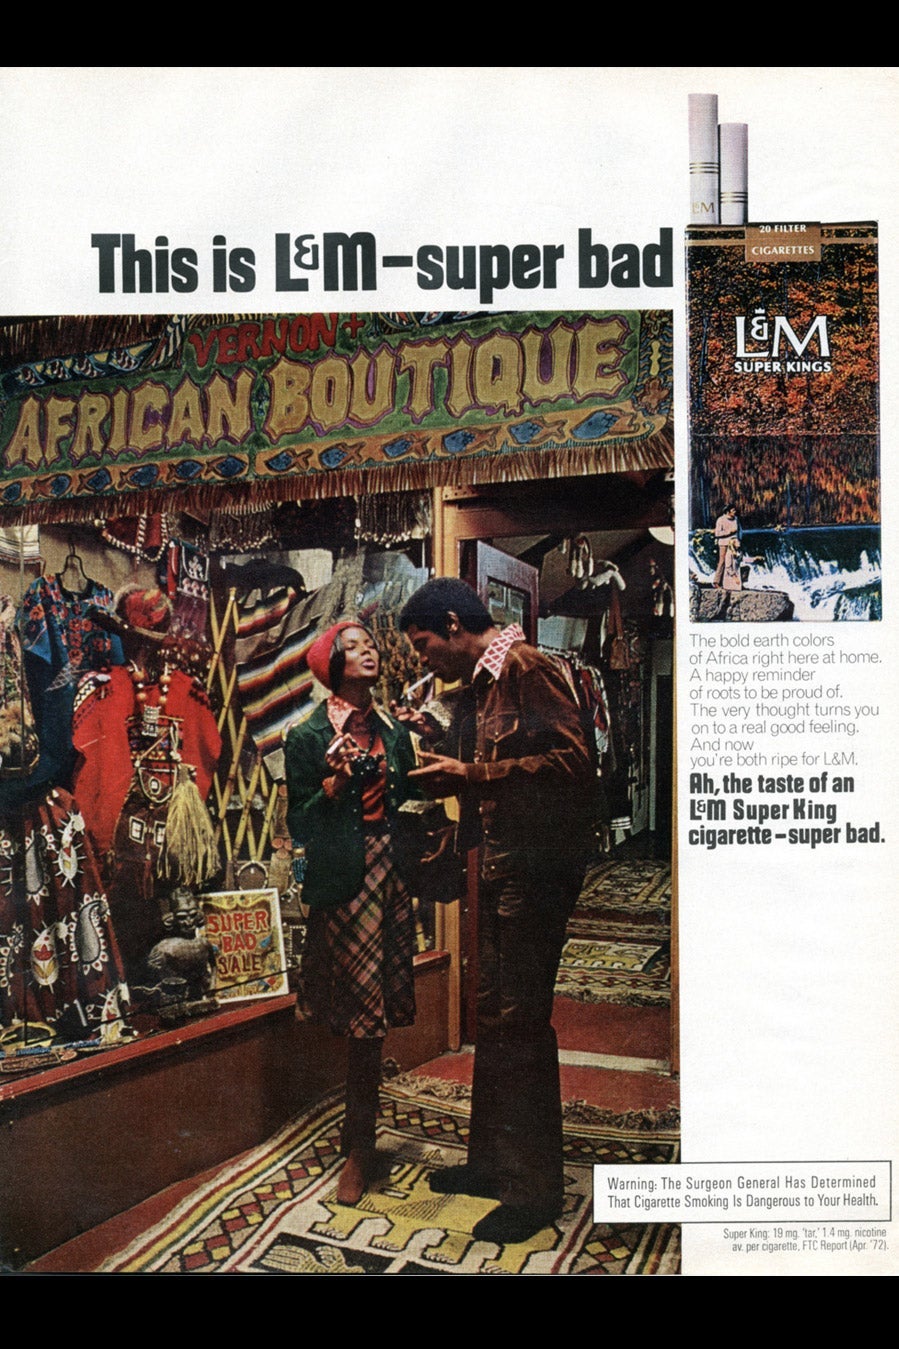 An ad for L&M Super Kings cigarettes depicting a Black couple in front of a African boutique.